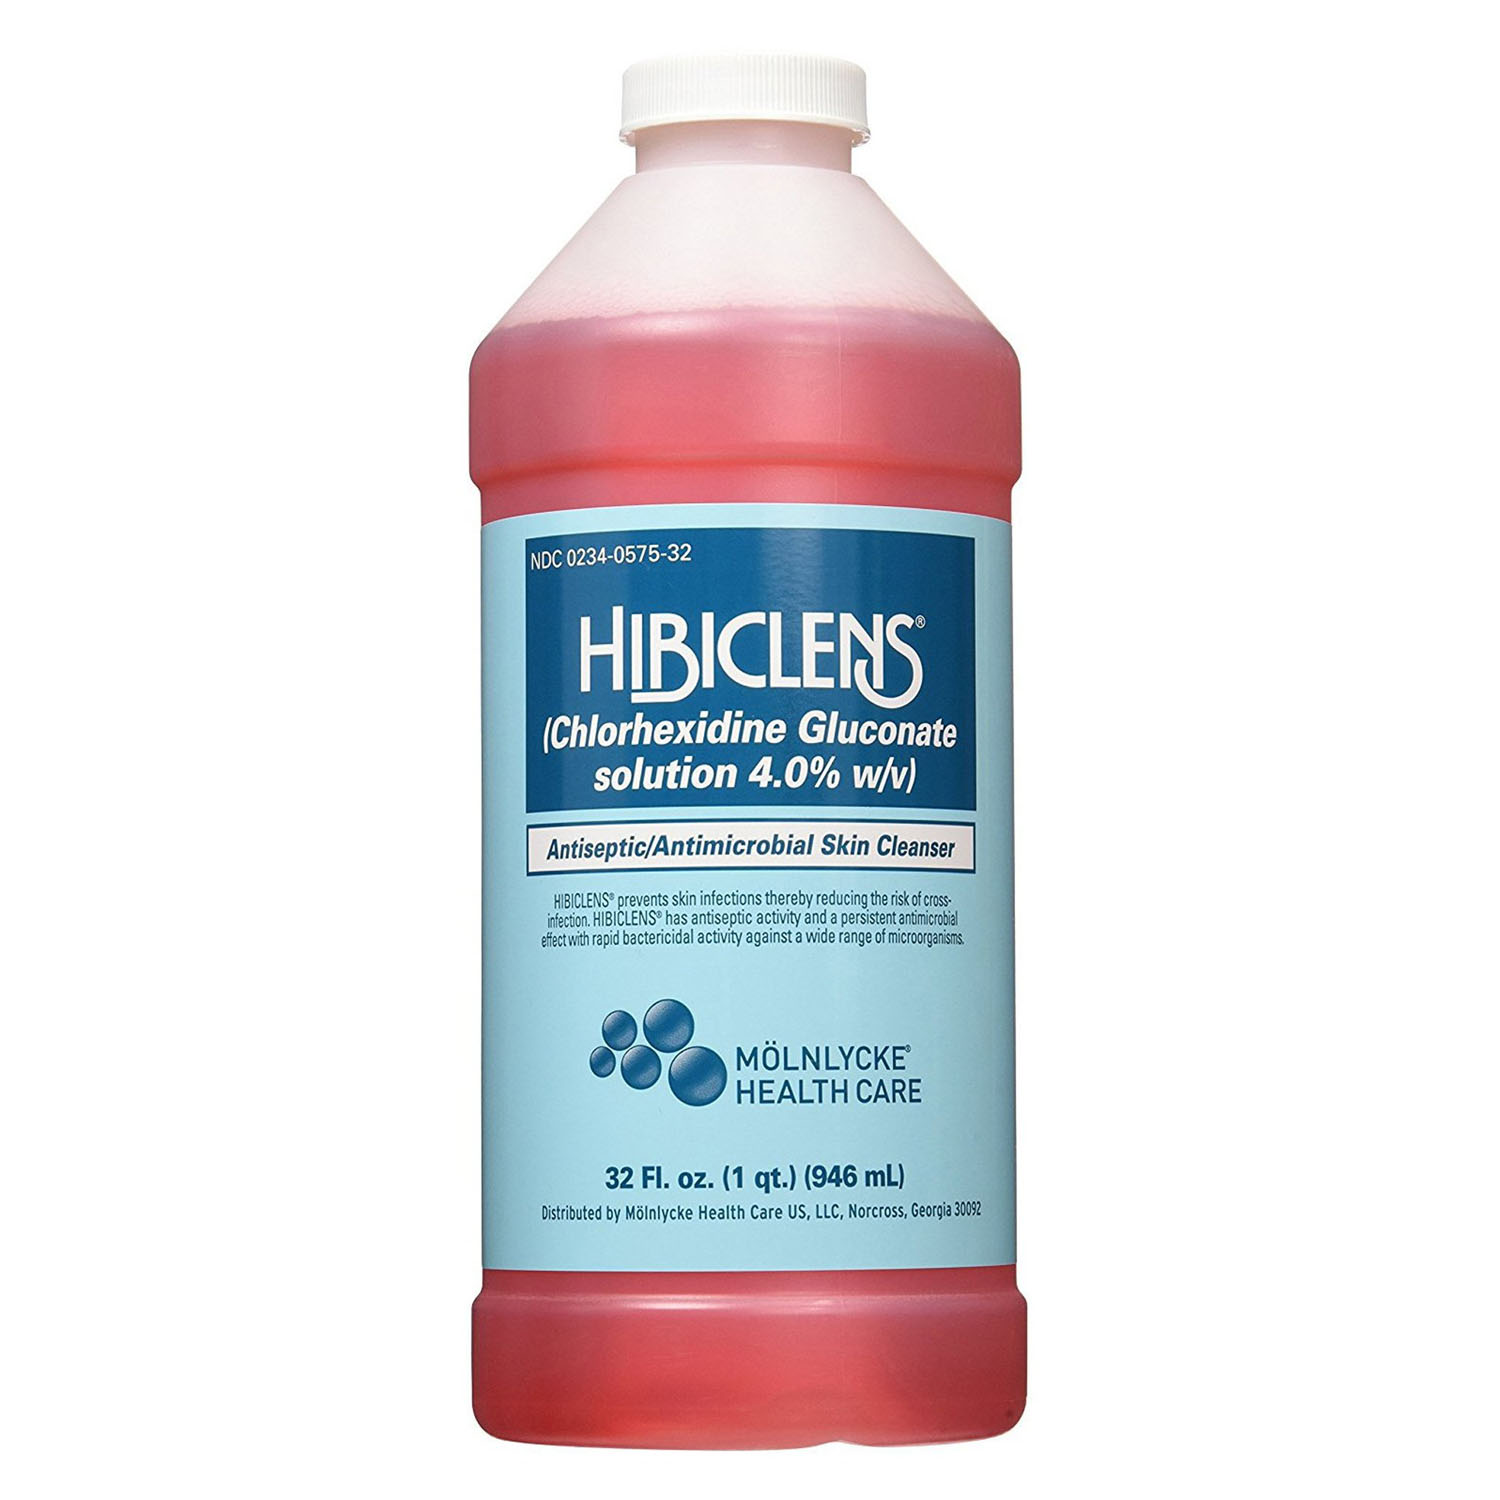 MOLNLYCKE HIBICLENS ANTISEPTIC ANTIMICROBIAL SKIN CLEANSER : 57532 CS $184.12 Stocked